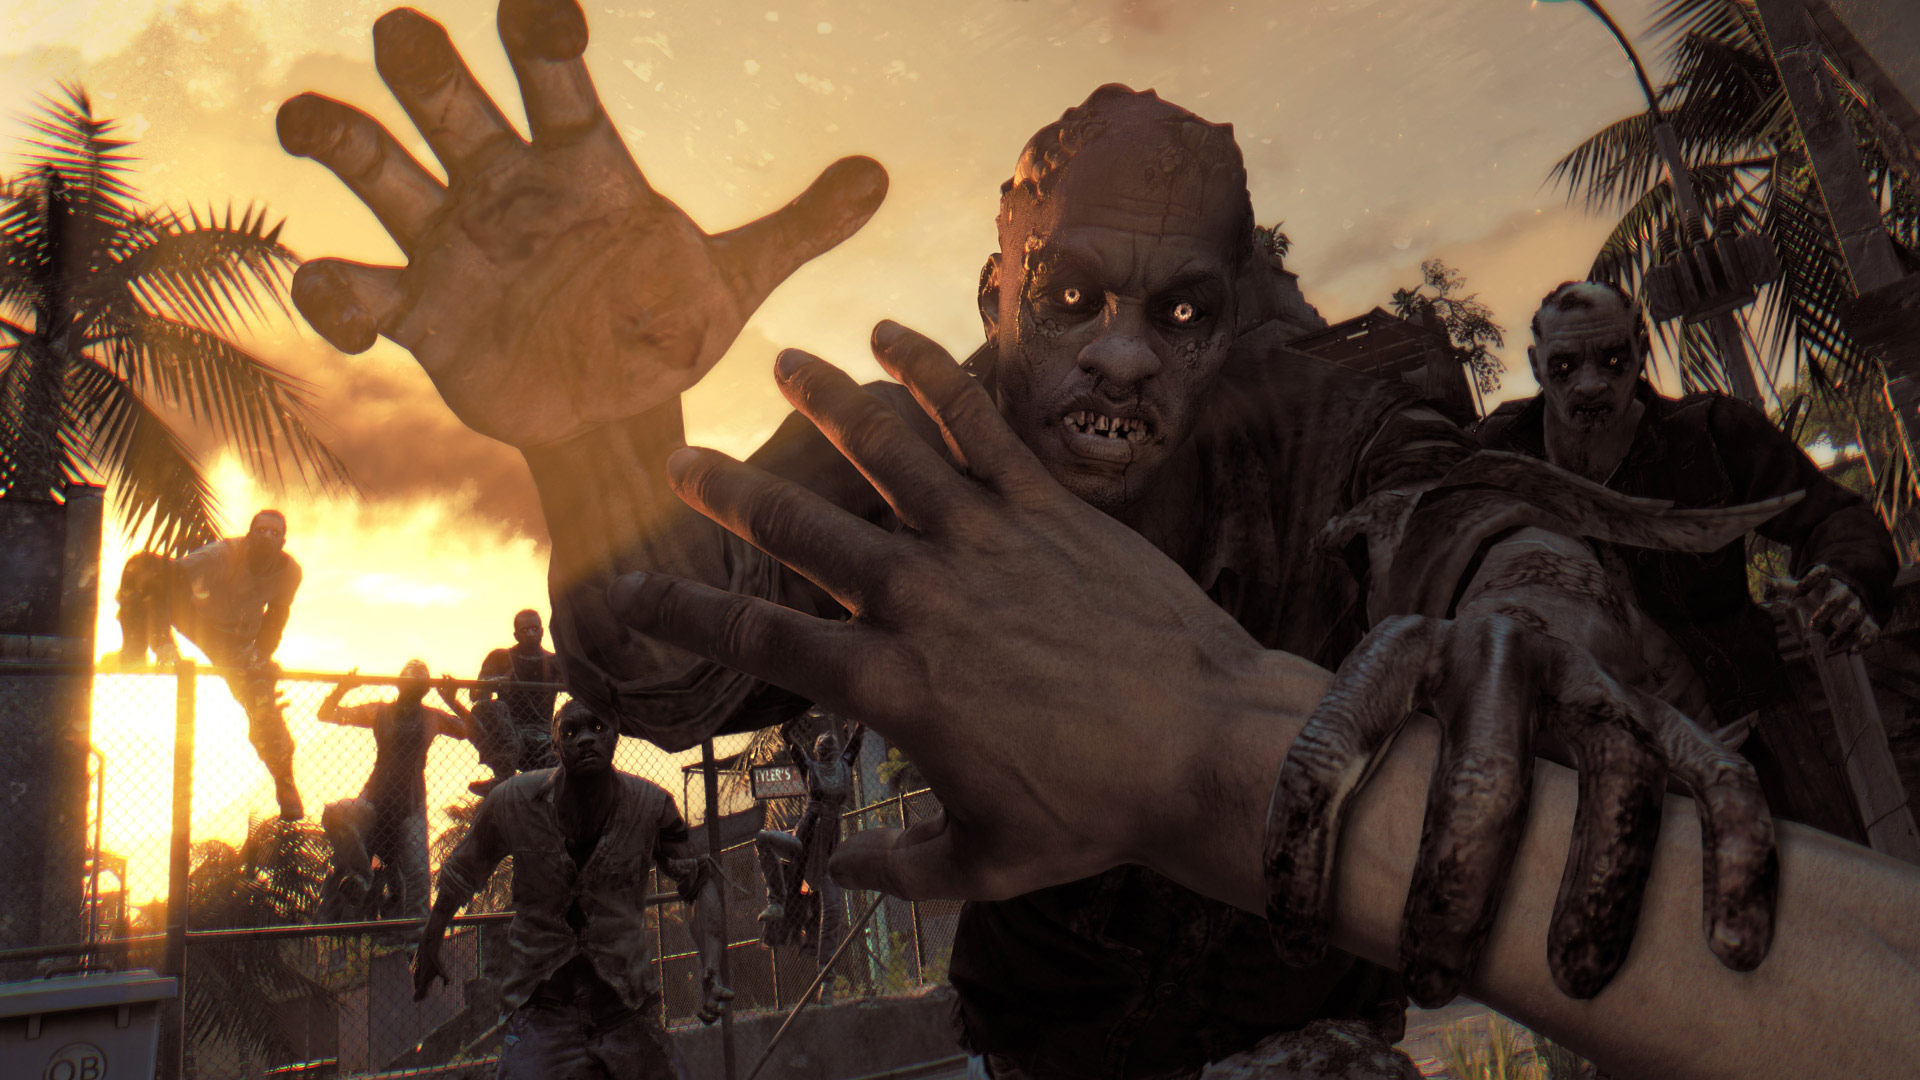 Dying Light Backgrounds on Wallpapers Vista